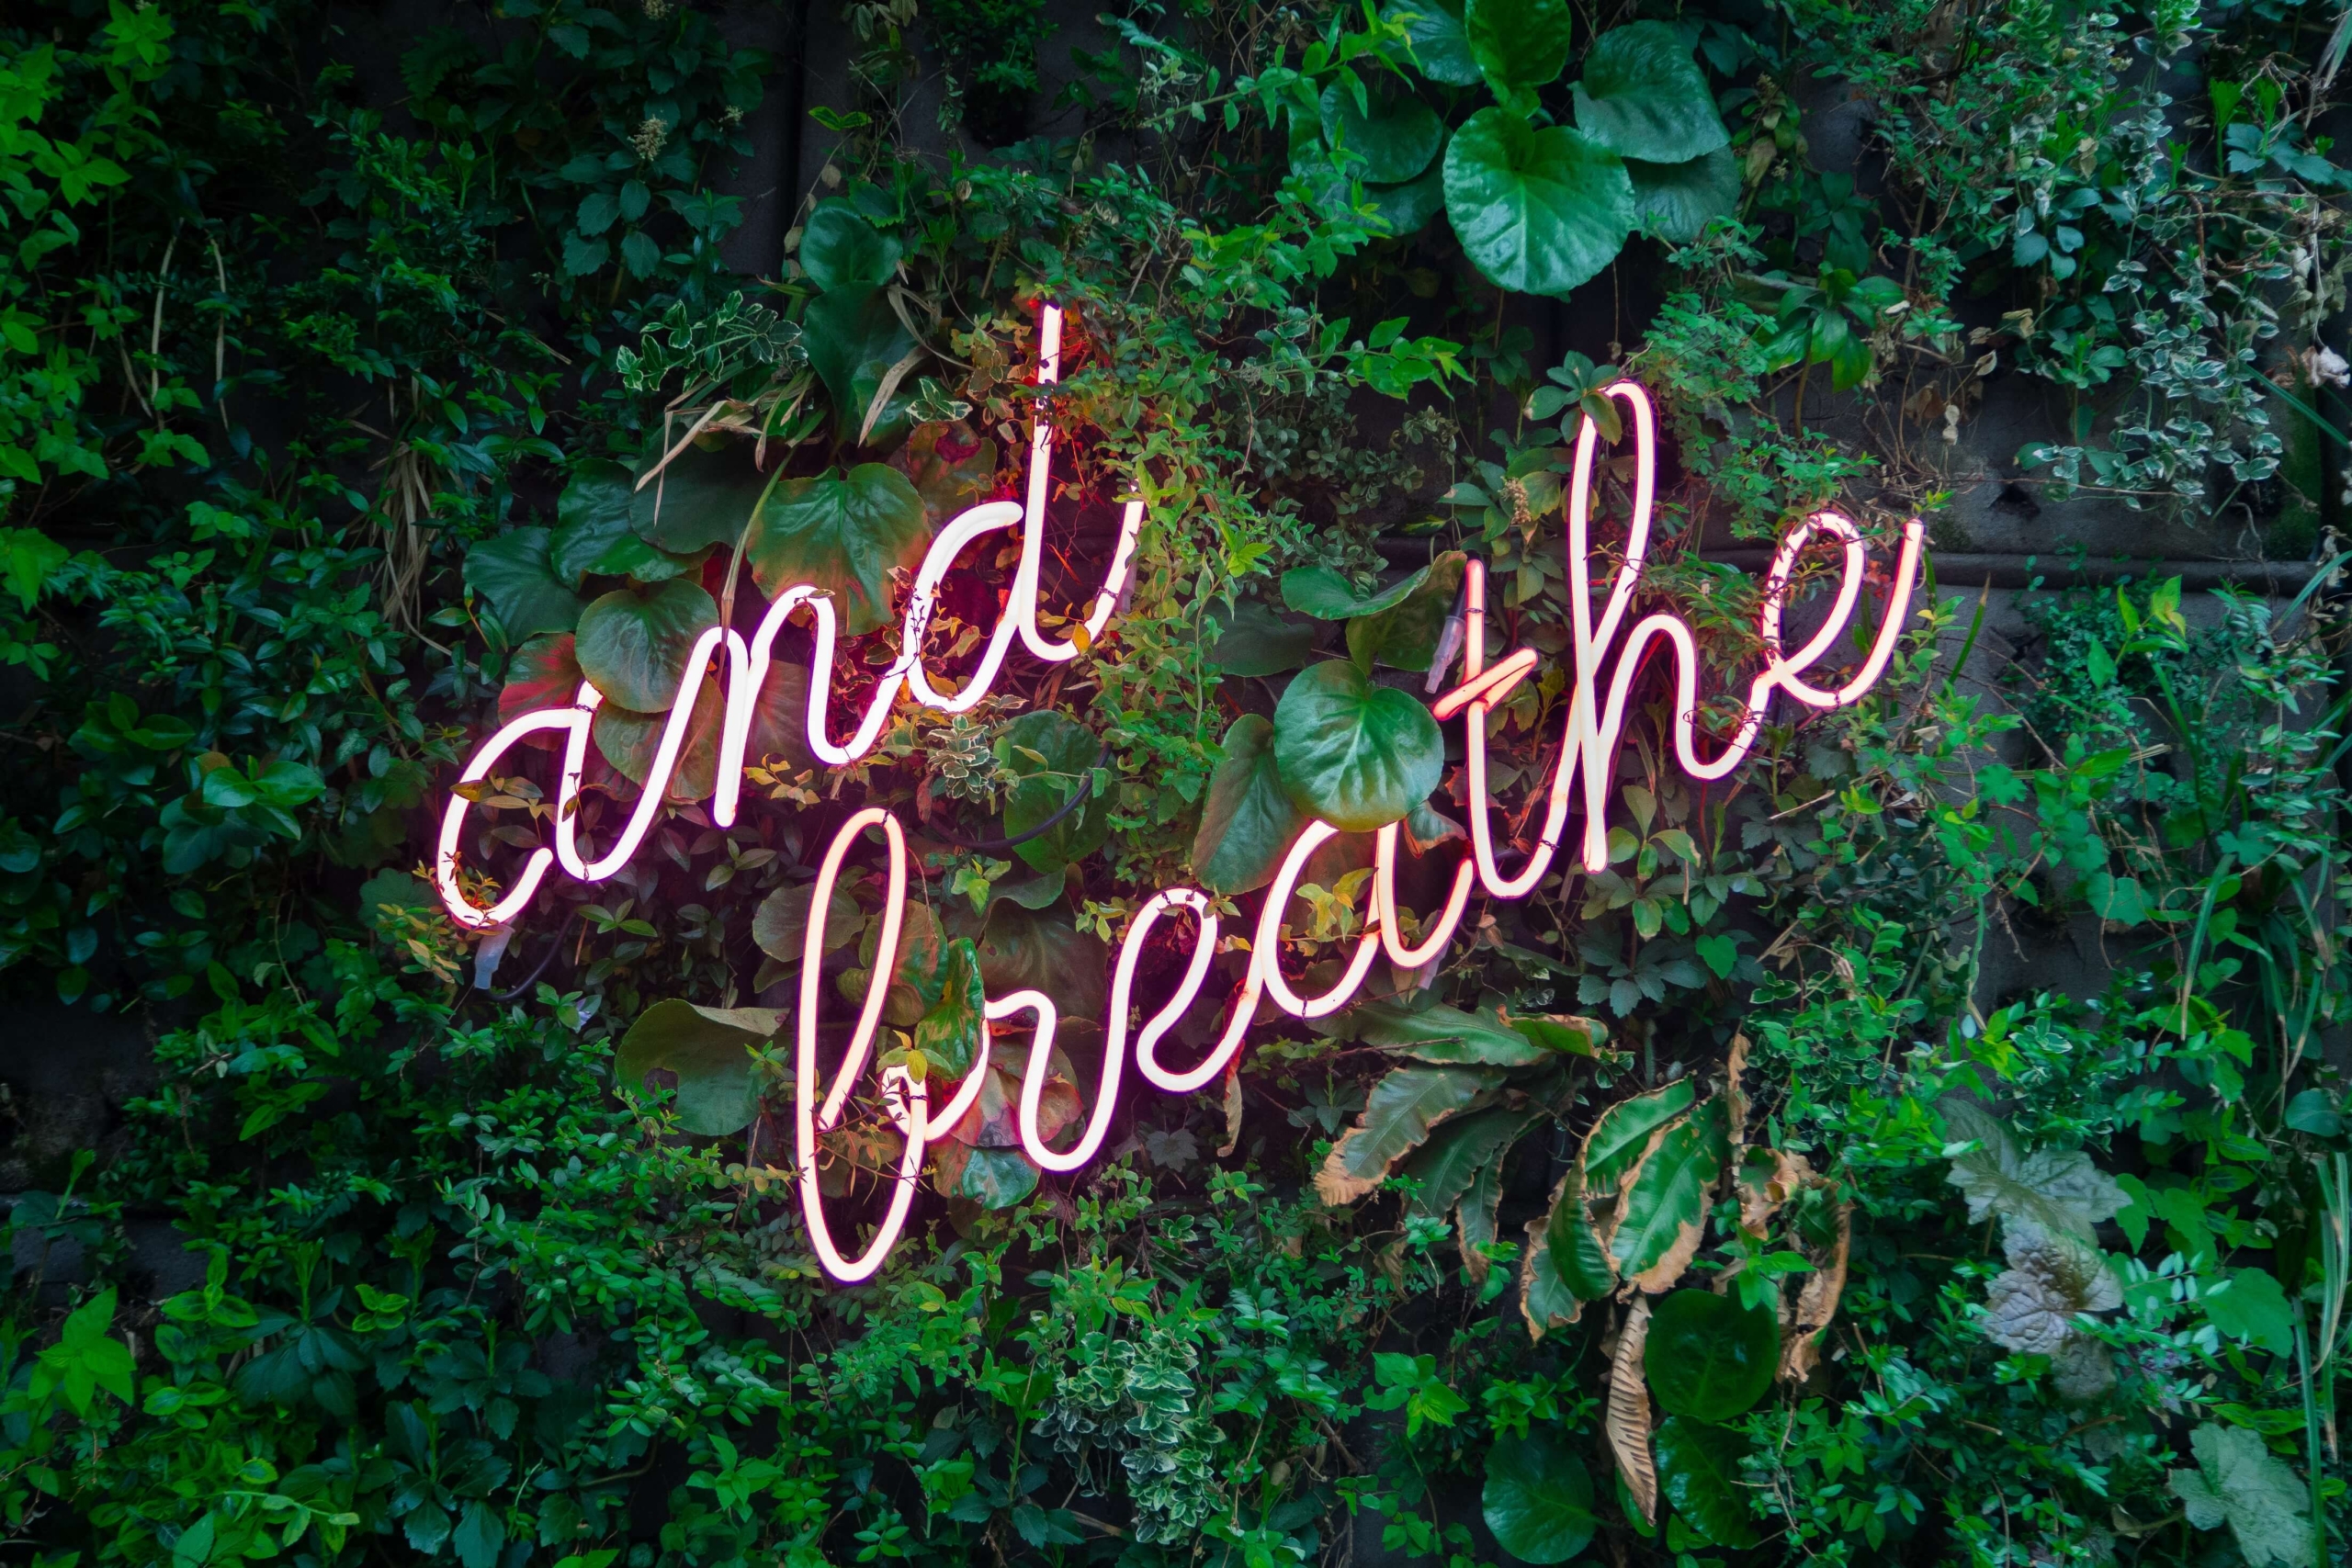 Image of a grassy wall with a neon sign that reads and breathe. Work through your anxiety symptoms and begin coping with the help of EMDR therapy in Las Vegas, NV.